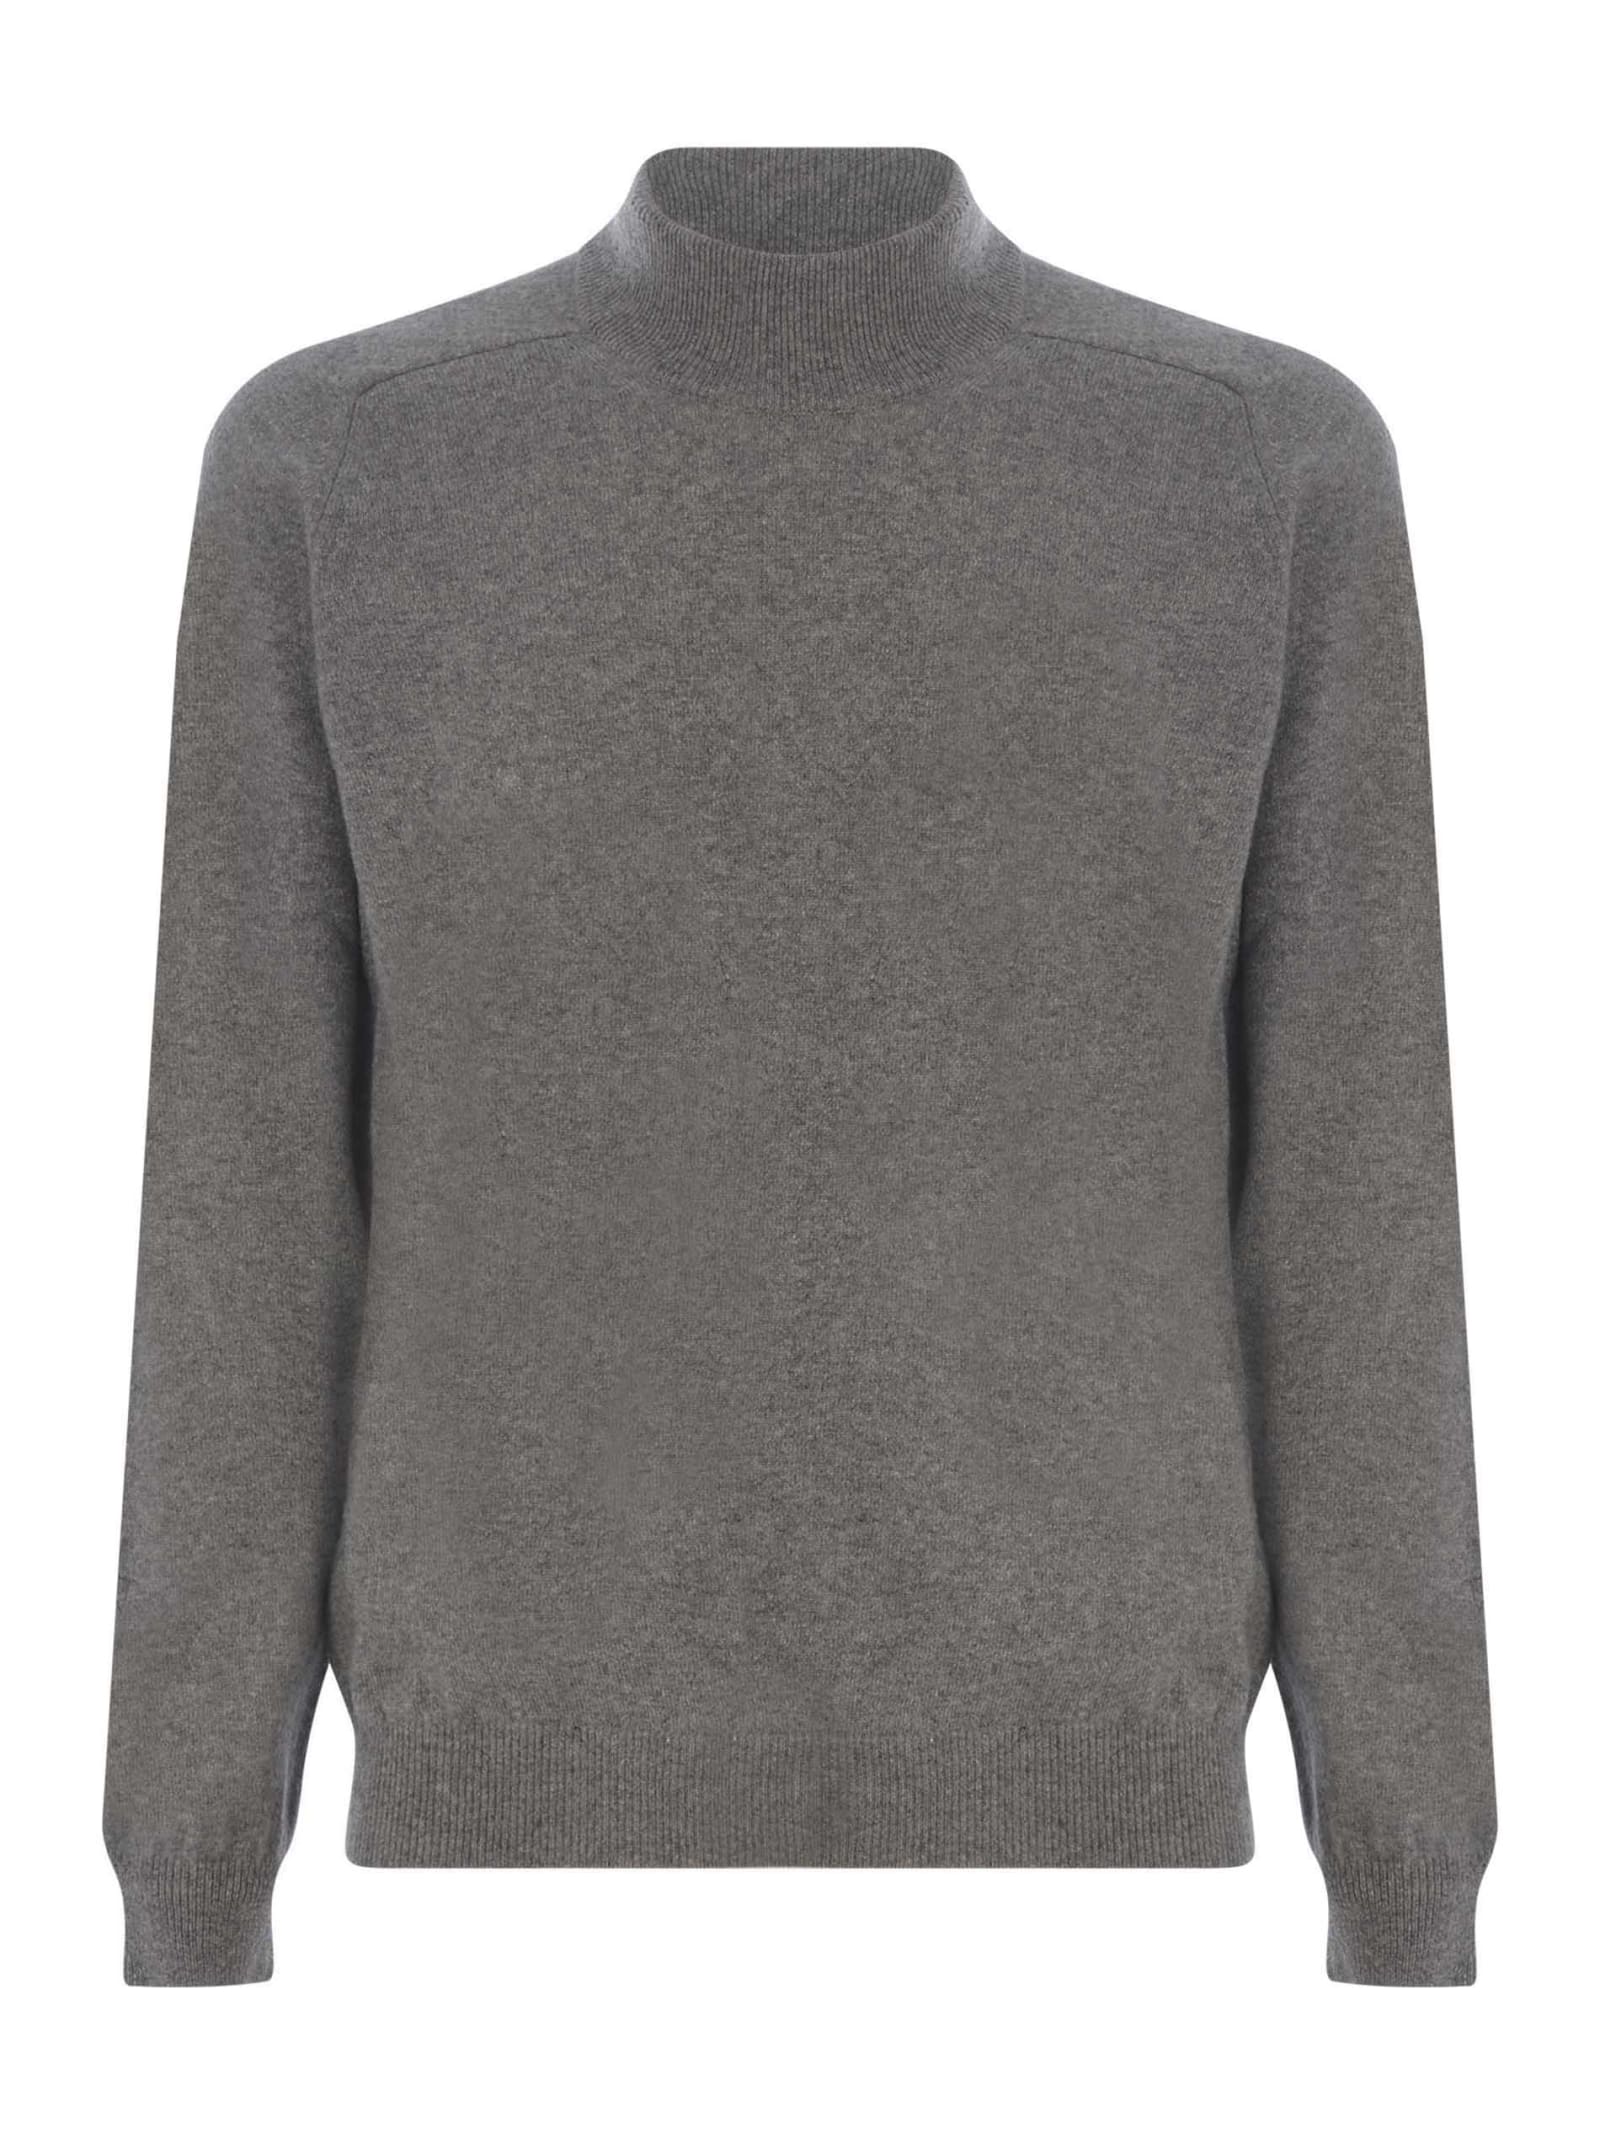 Shop Jeordie's Sweater Jeodies Made Of Extra Fine Wool In Grigio